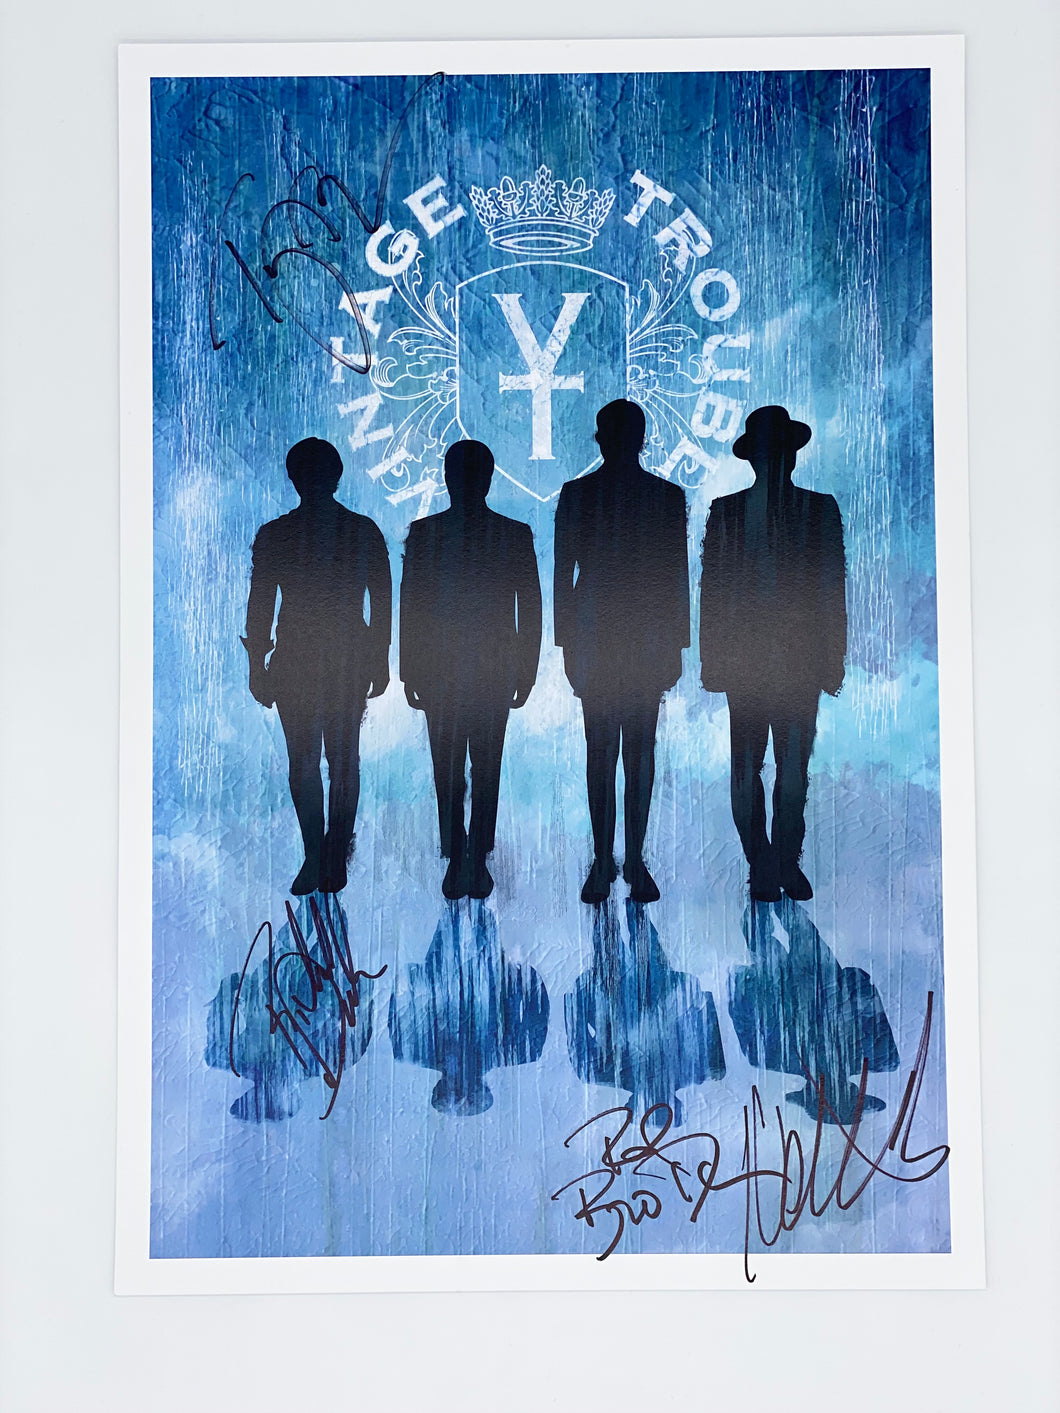 Blue Shadow Poster signed by all 4 members